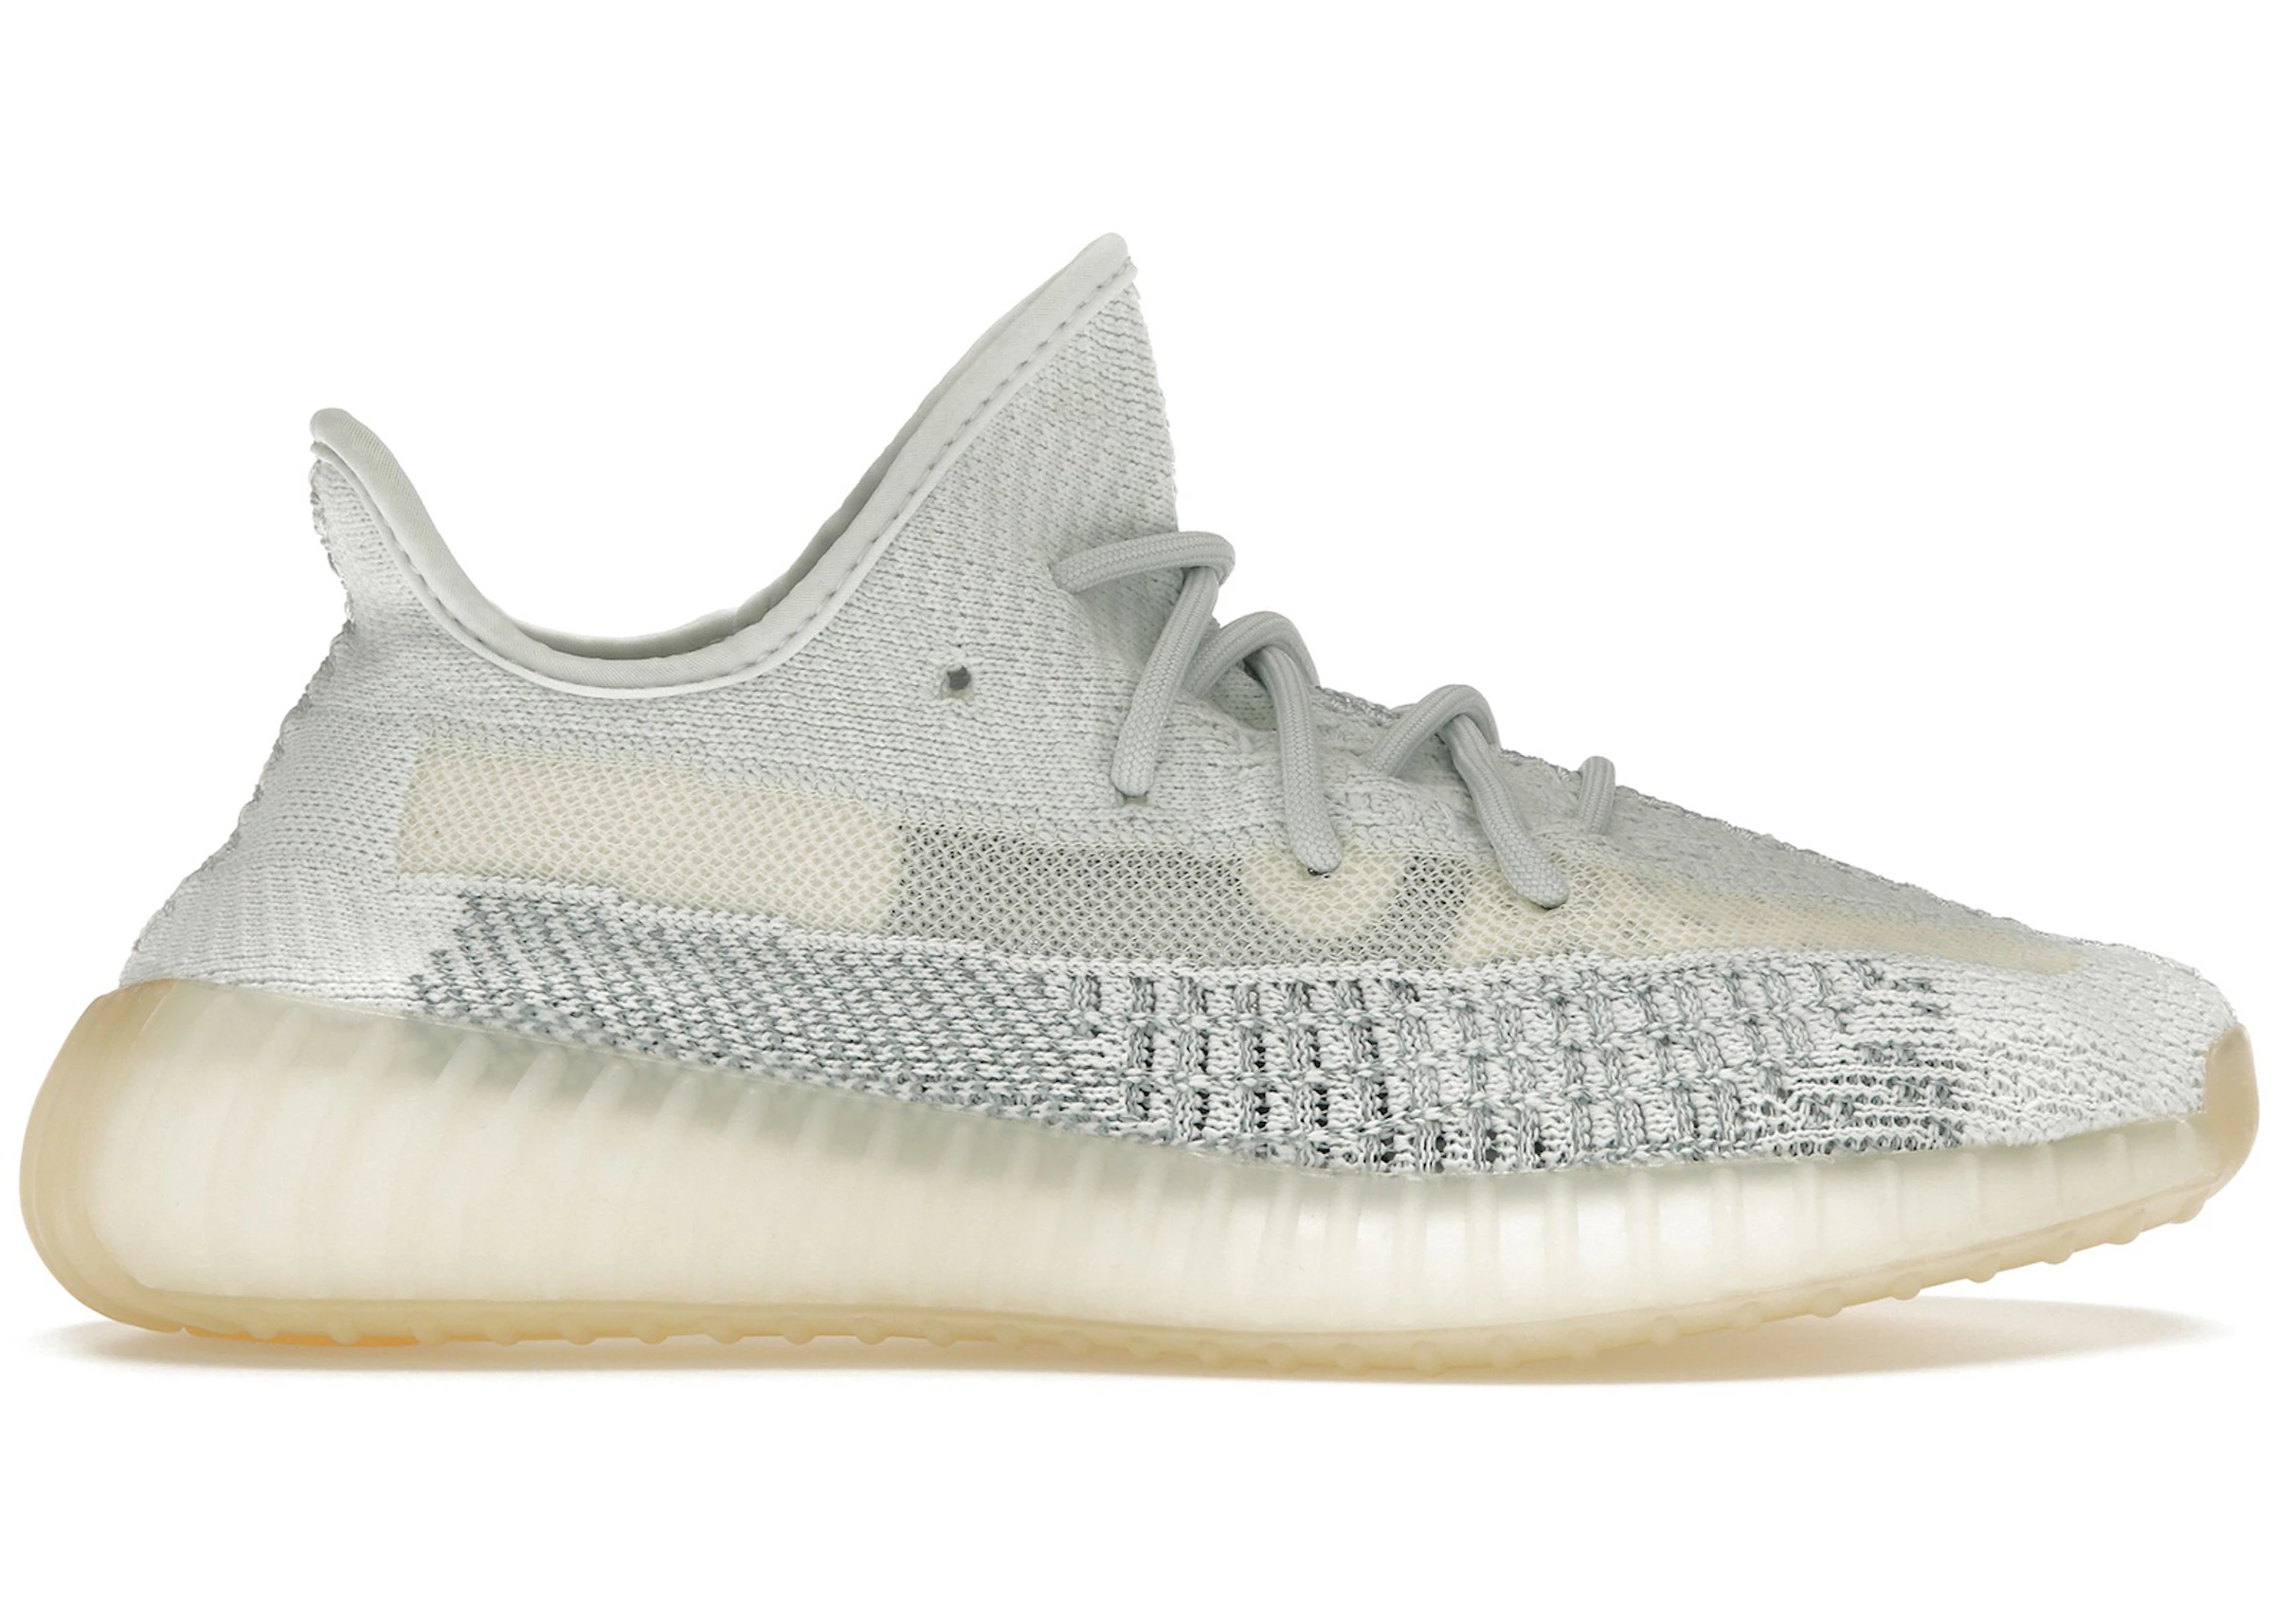 Honger blootstelling Centimeter adidas Yeezy Boost 350 V2 Cloud White (Reflective) - FW5317 - US